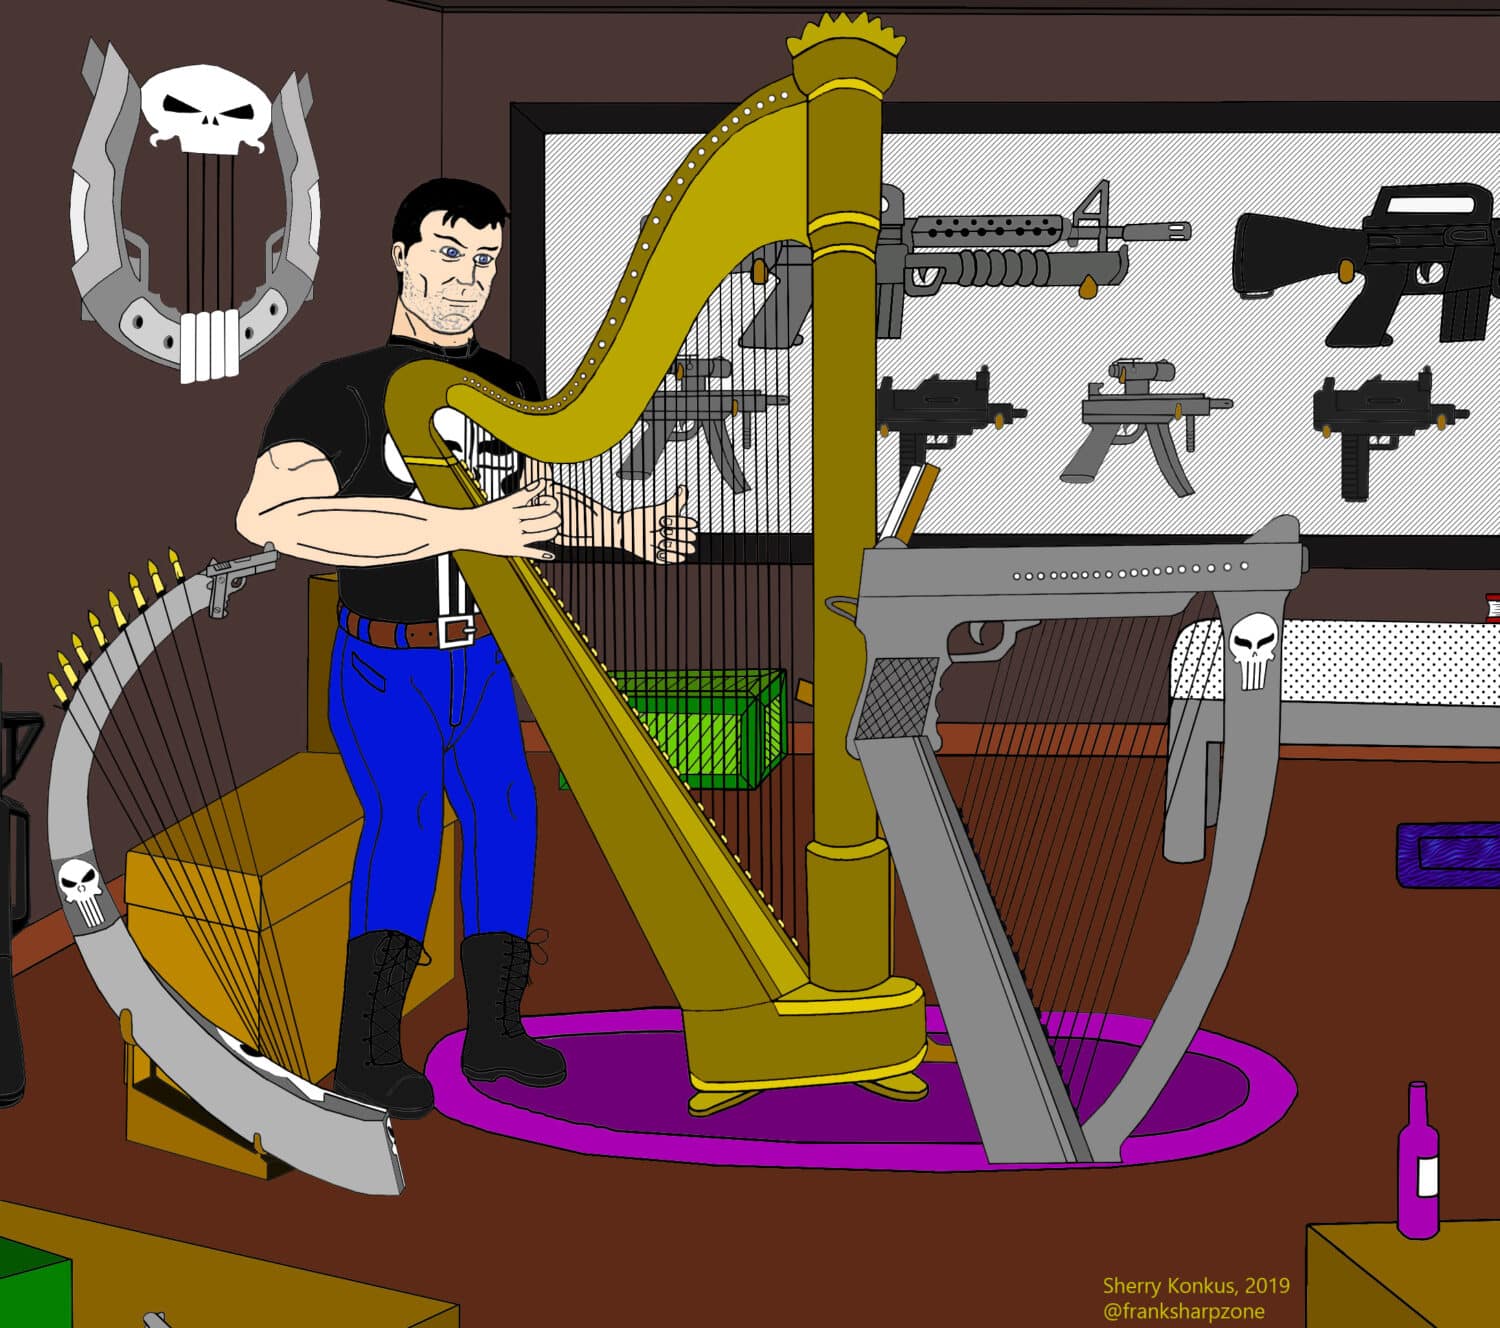 The Punisher practicing on the harp in one of his safehouses.